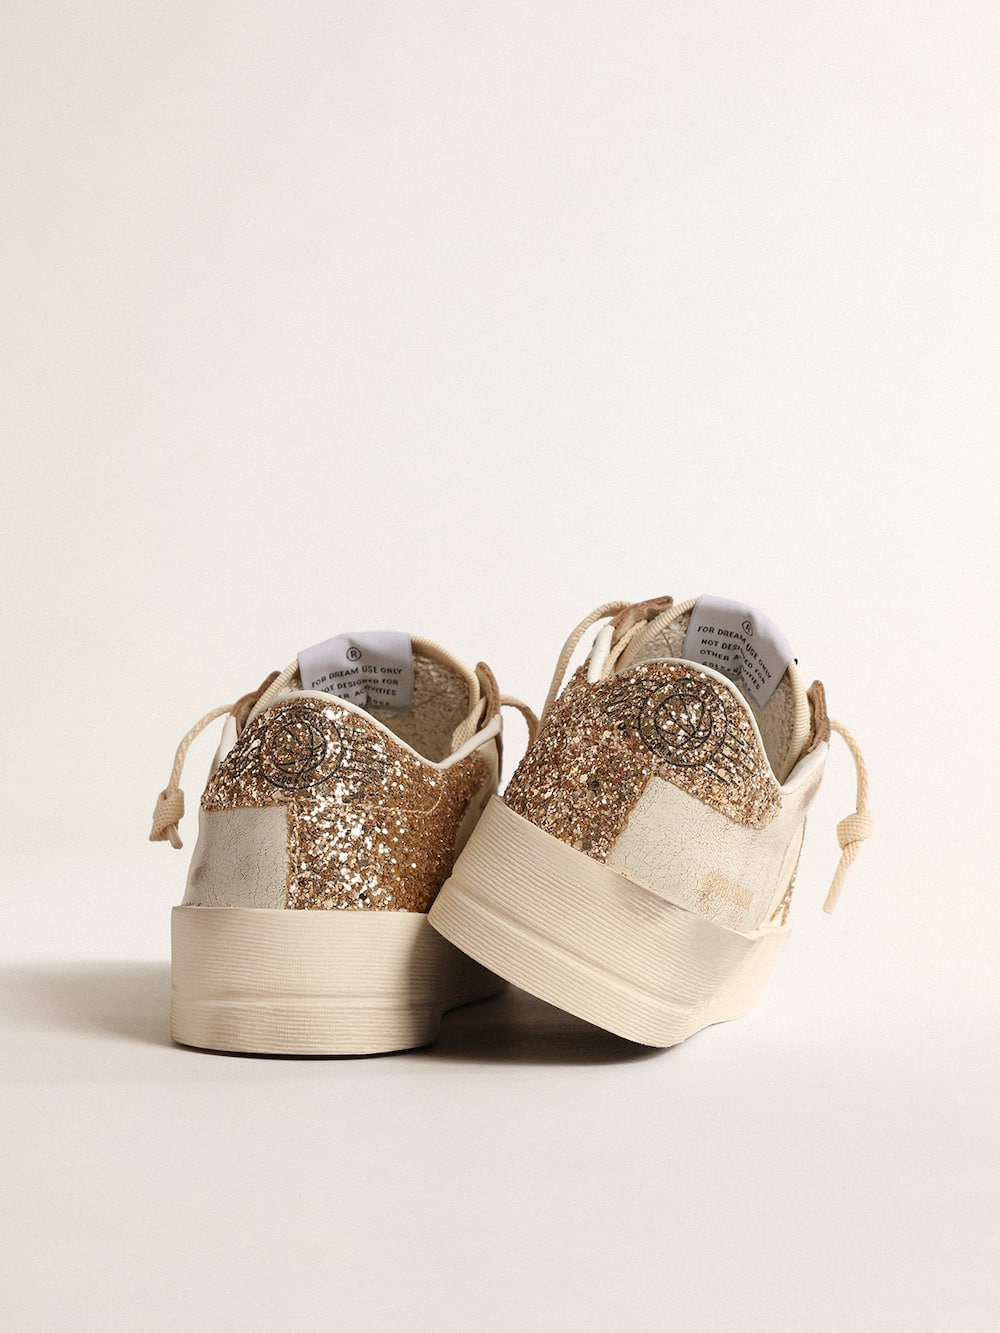 Golden Goose - Stardan in ecru nappa leather with gold glitter star and heel tab in 